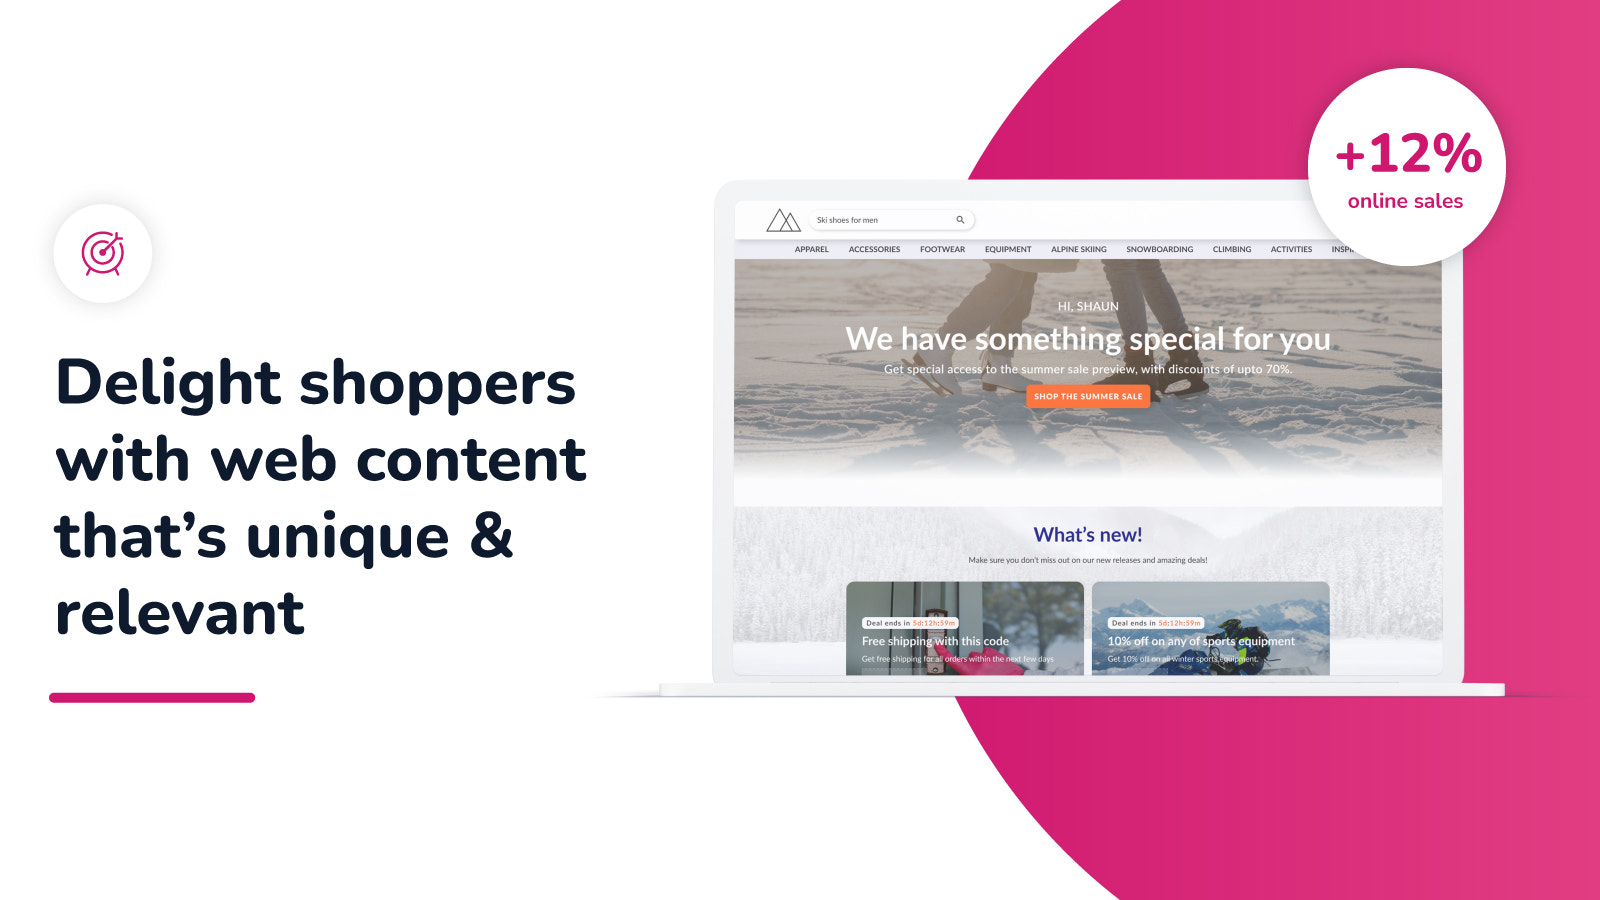 Delight shoppers with web & app content that's relevant to them